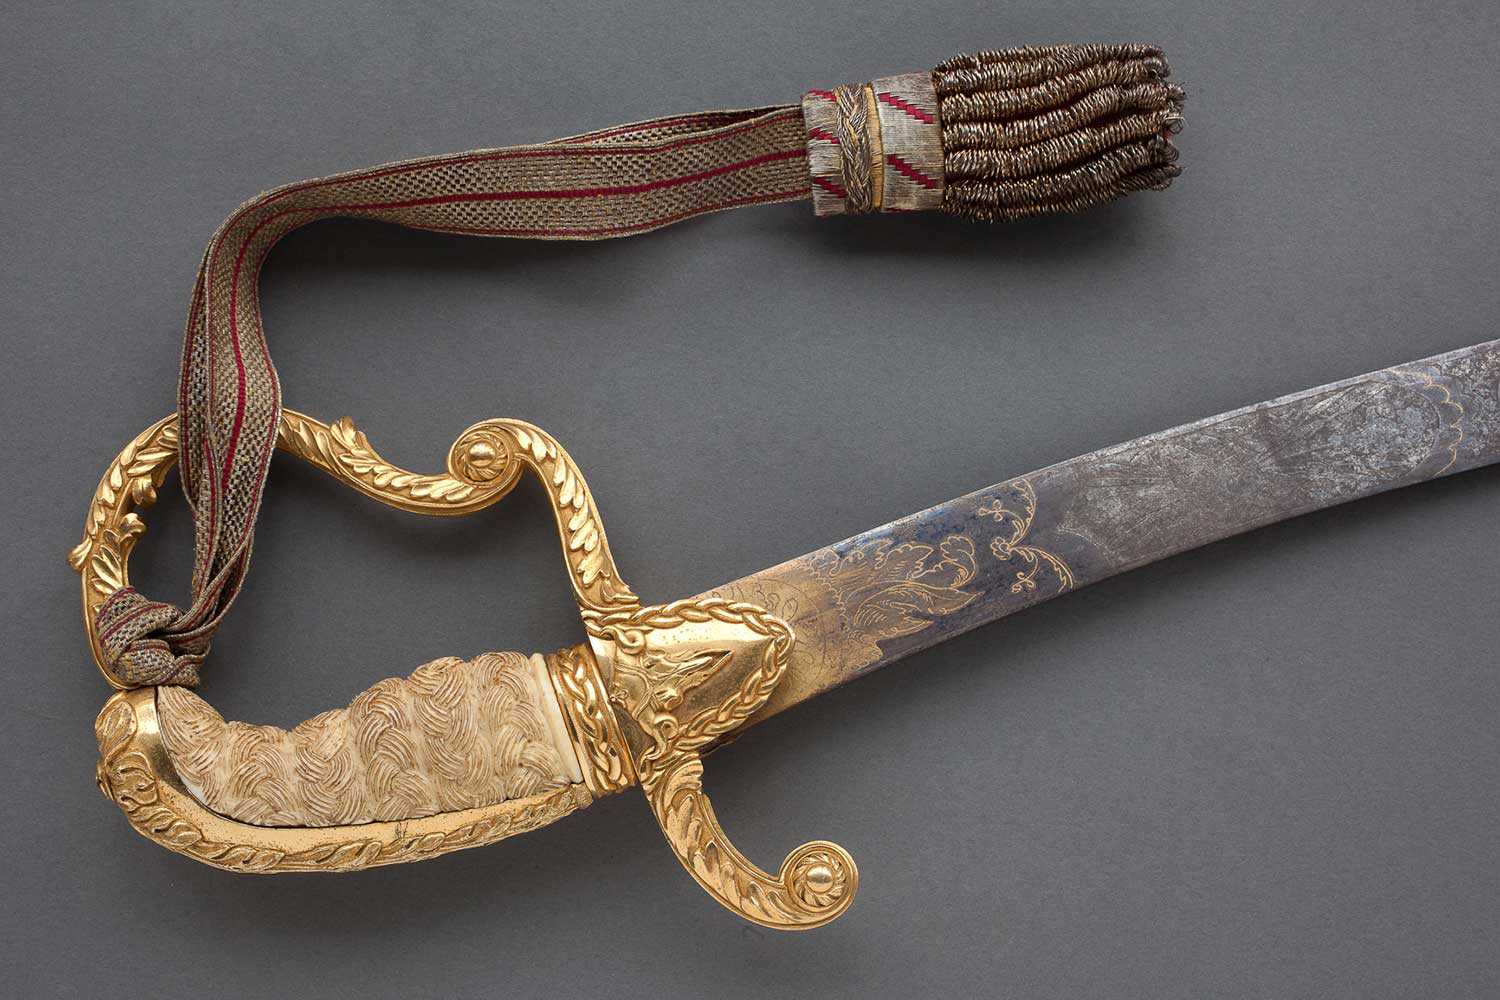 Sword from the Sheaffe collection